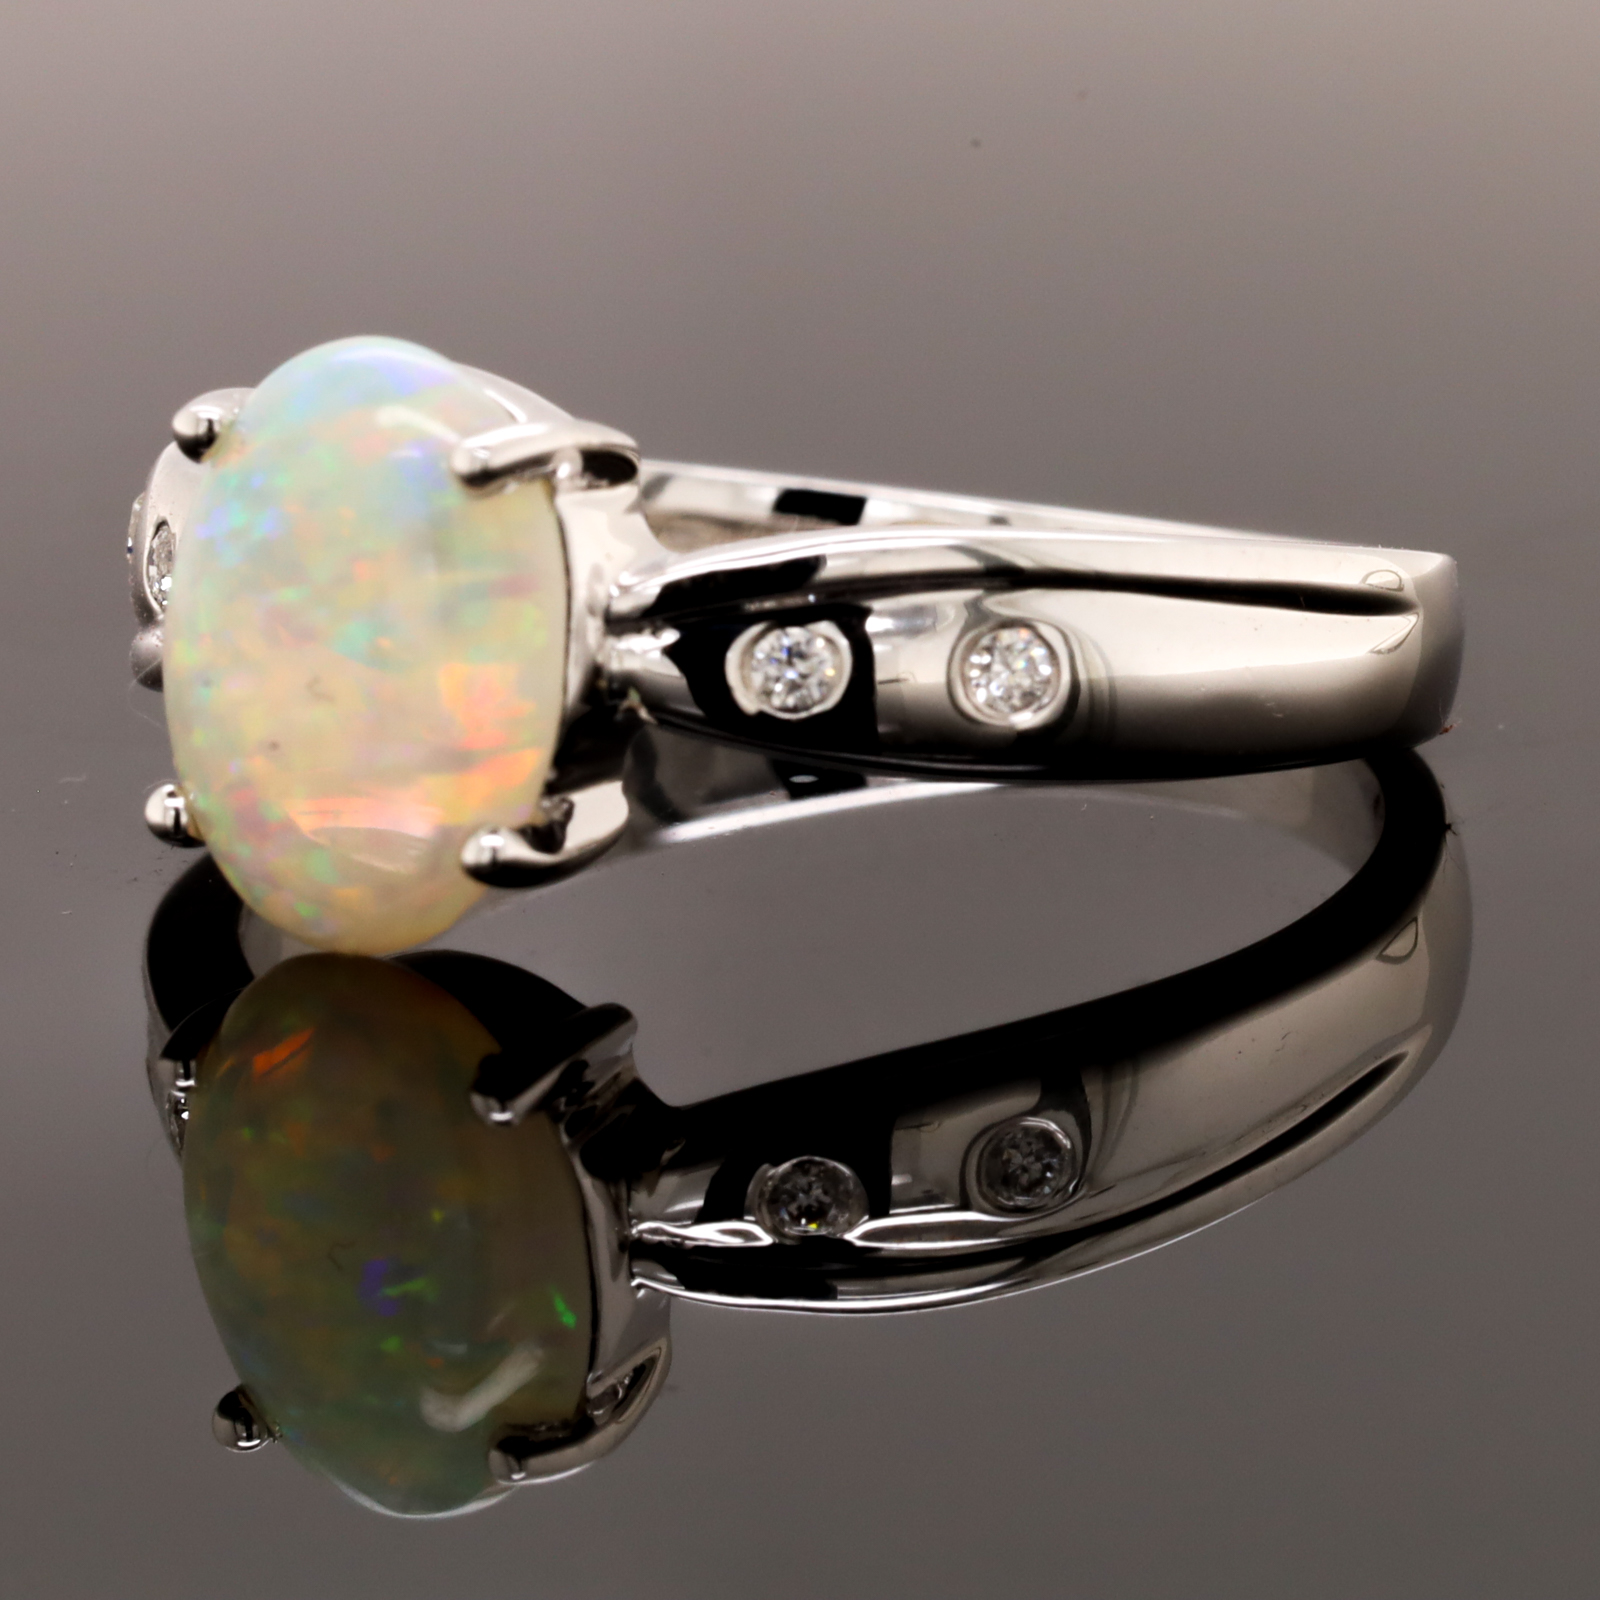 Blue Orange and Green White Gold Solid Australian Crystal Opal Engagement Ring with Diamonds